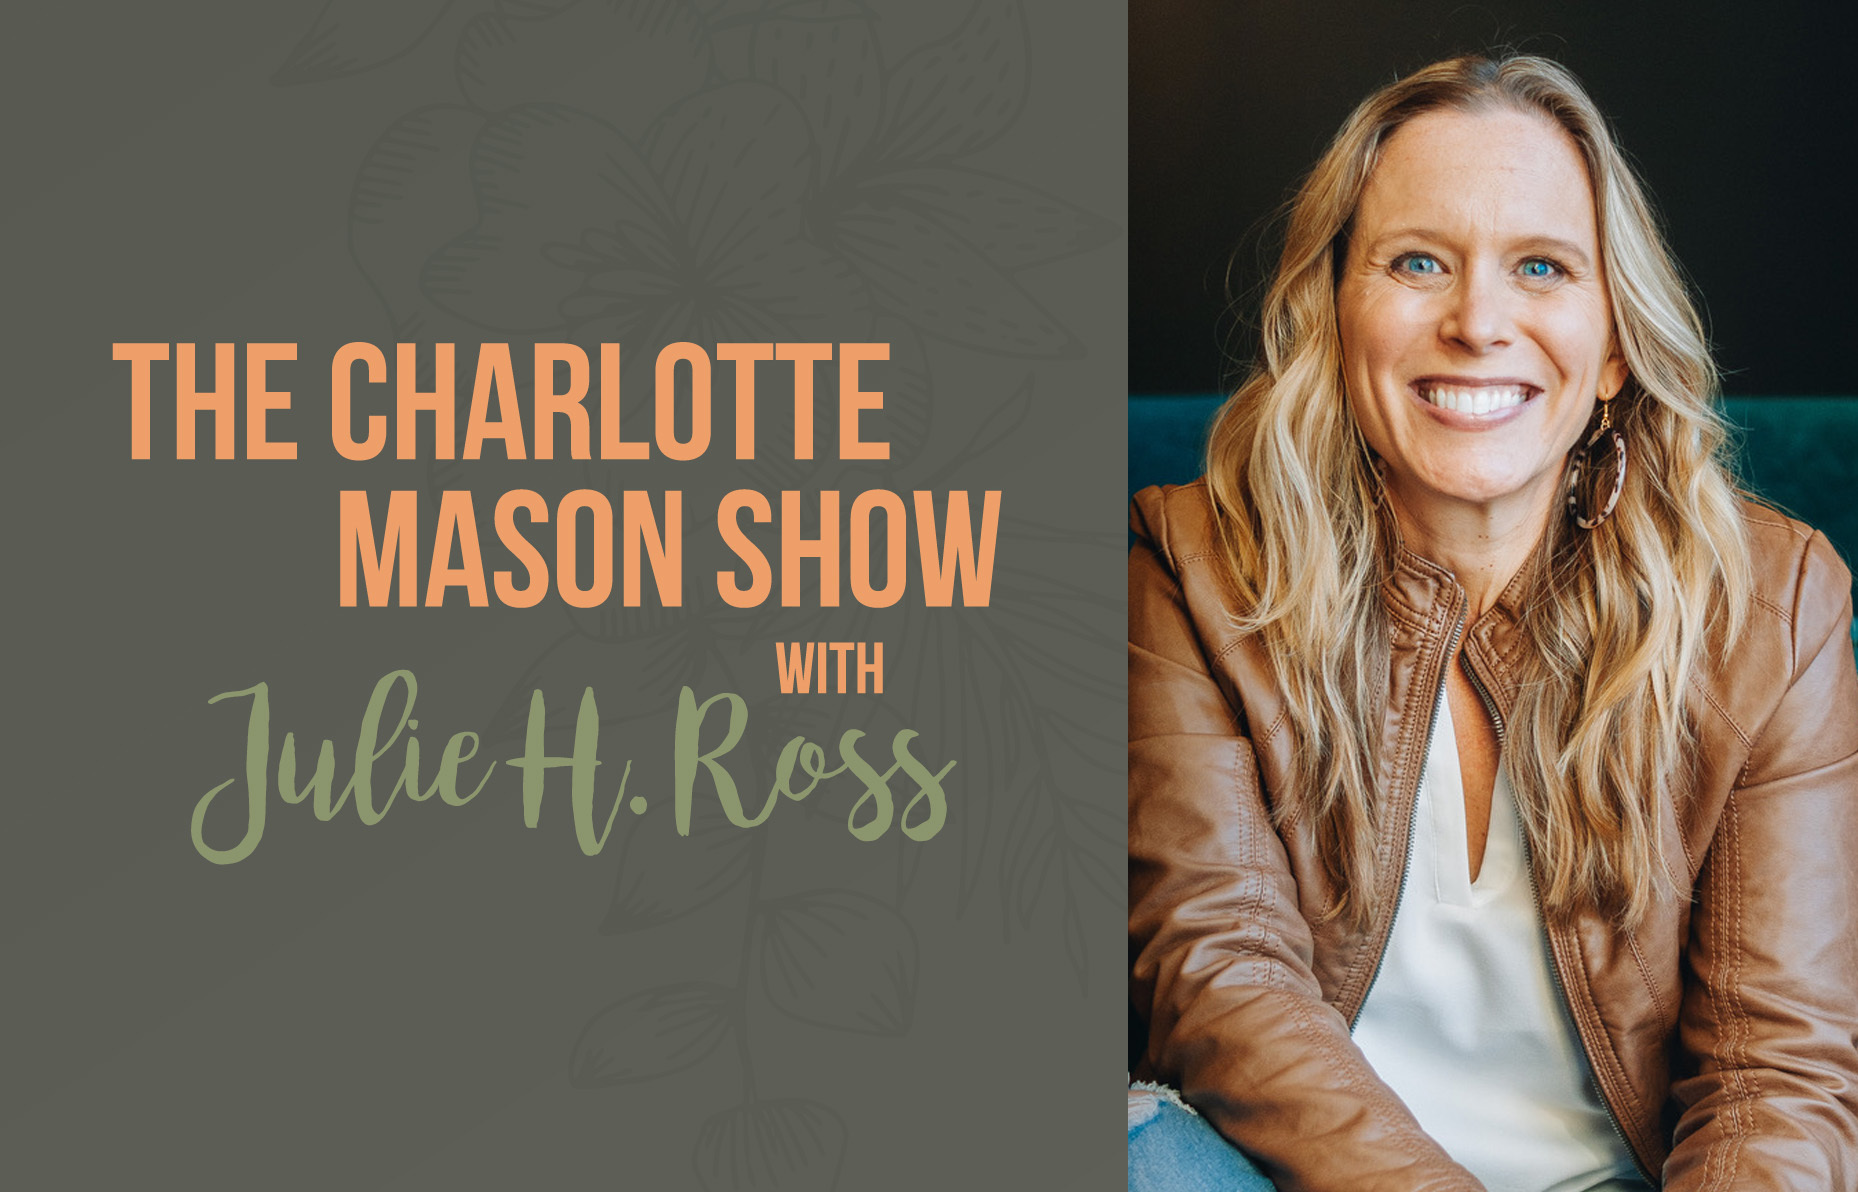 CM 3 Episode #13 Heritage Matters: How to Incorporate Heritage into Your Own Homeschool Journey with Julie H. Ross and Amber Johnston